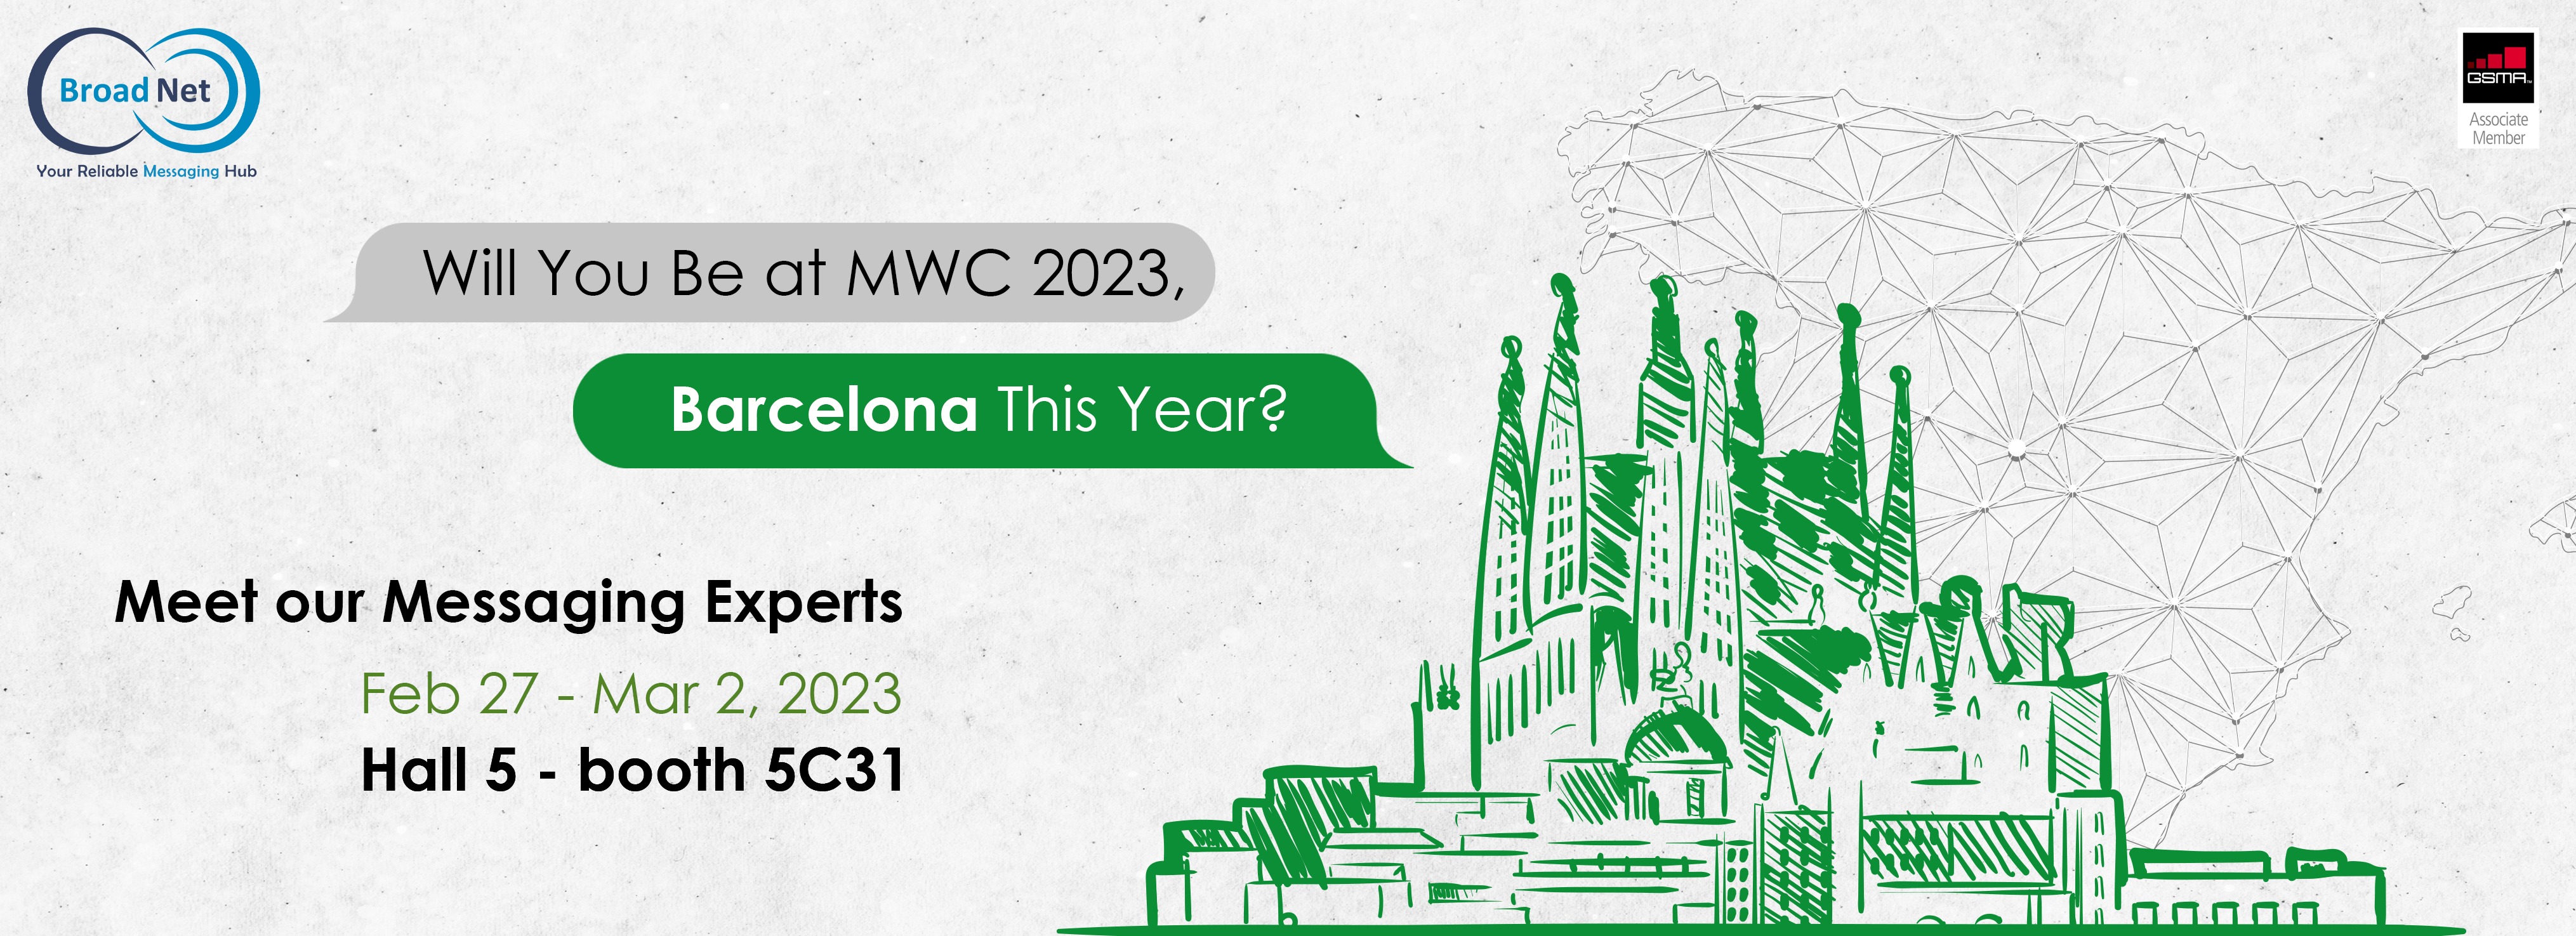 Will You Be at MWC 2023, Barcelona This Year?